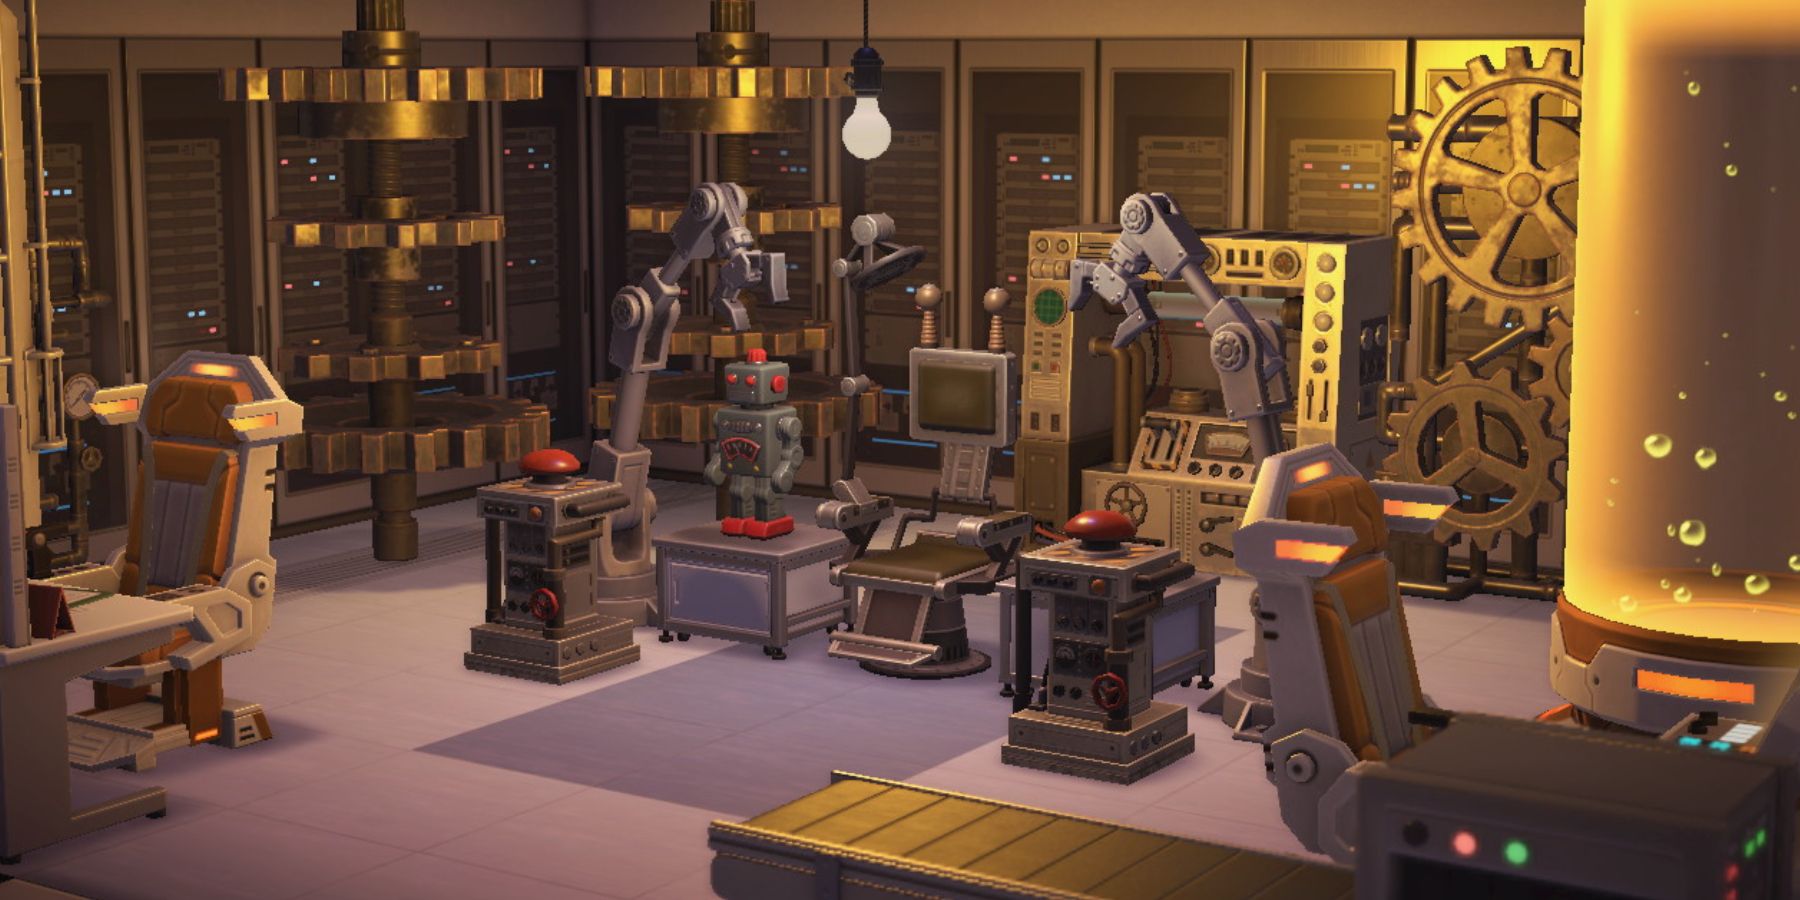 Players can design a robotics lab in Animal Crossing Happy Home Paradise.